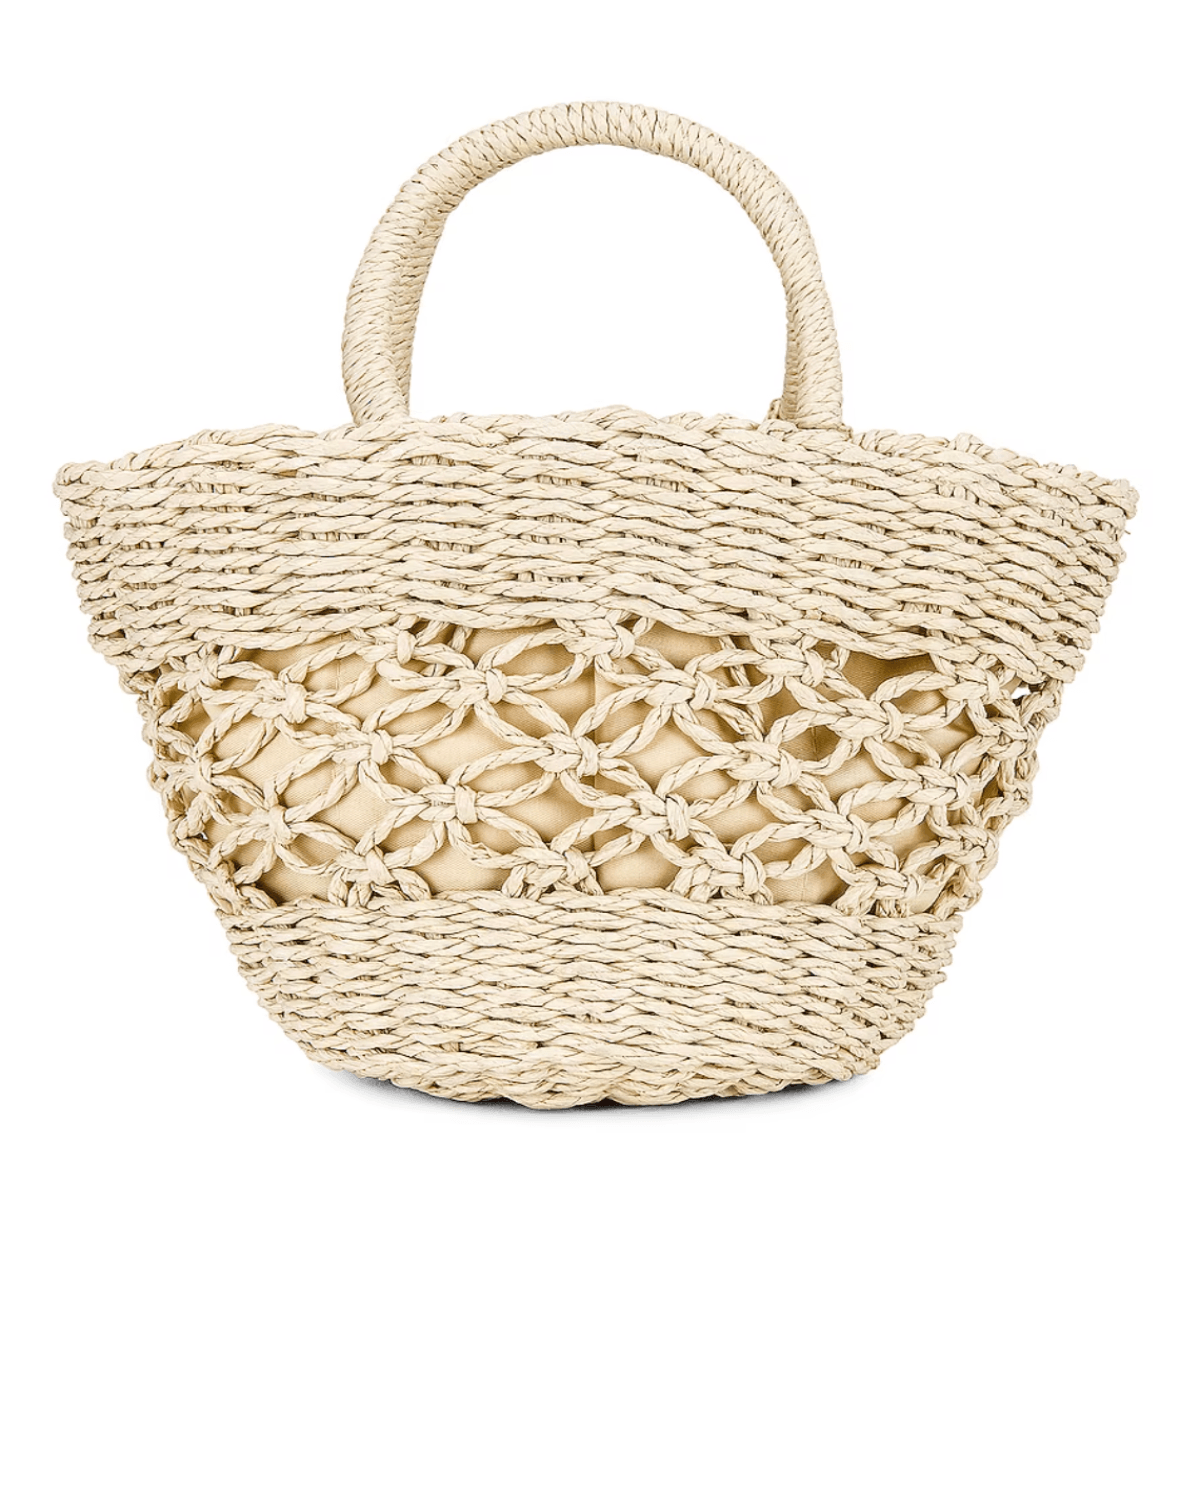 STRAW TOTE BAG - 8 Other Reasons